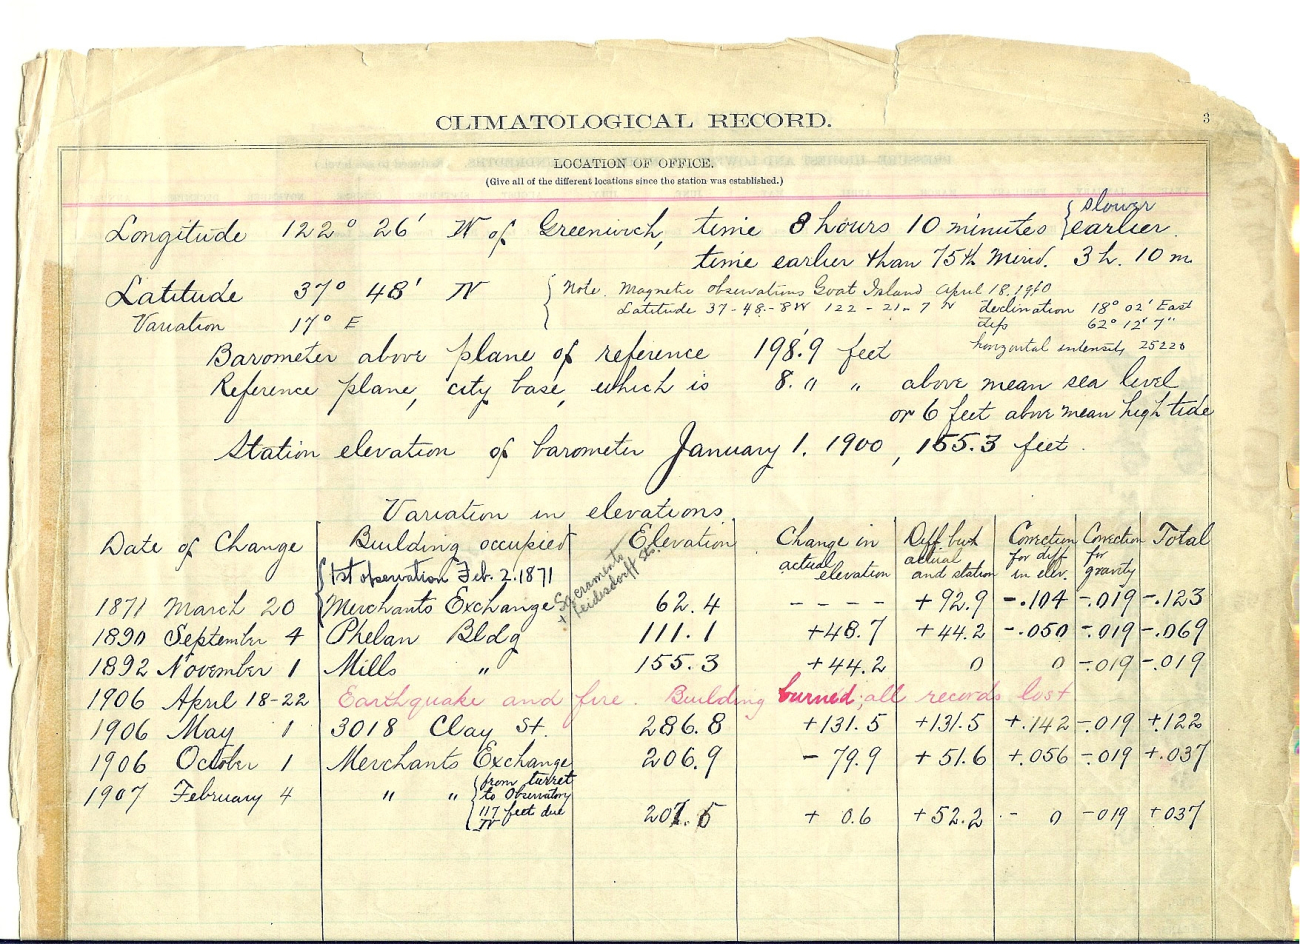 Record of elevations of various official observing sites in San Francisco fromthe date of first official observation on March 20, 1871, until 1907